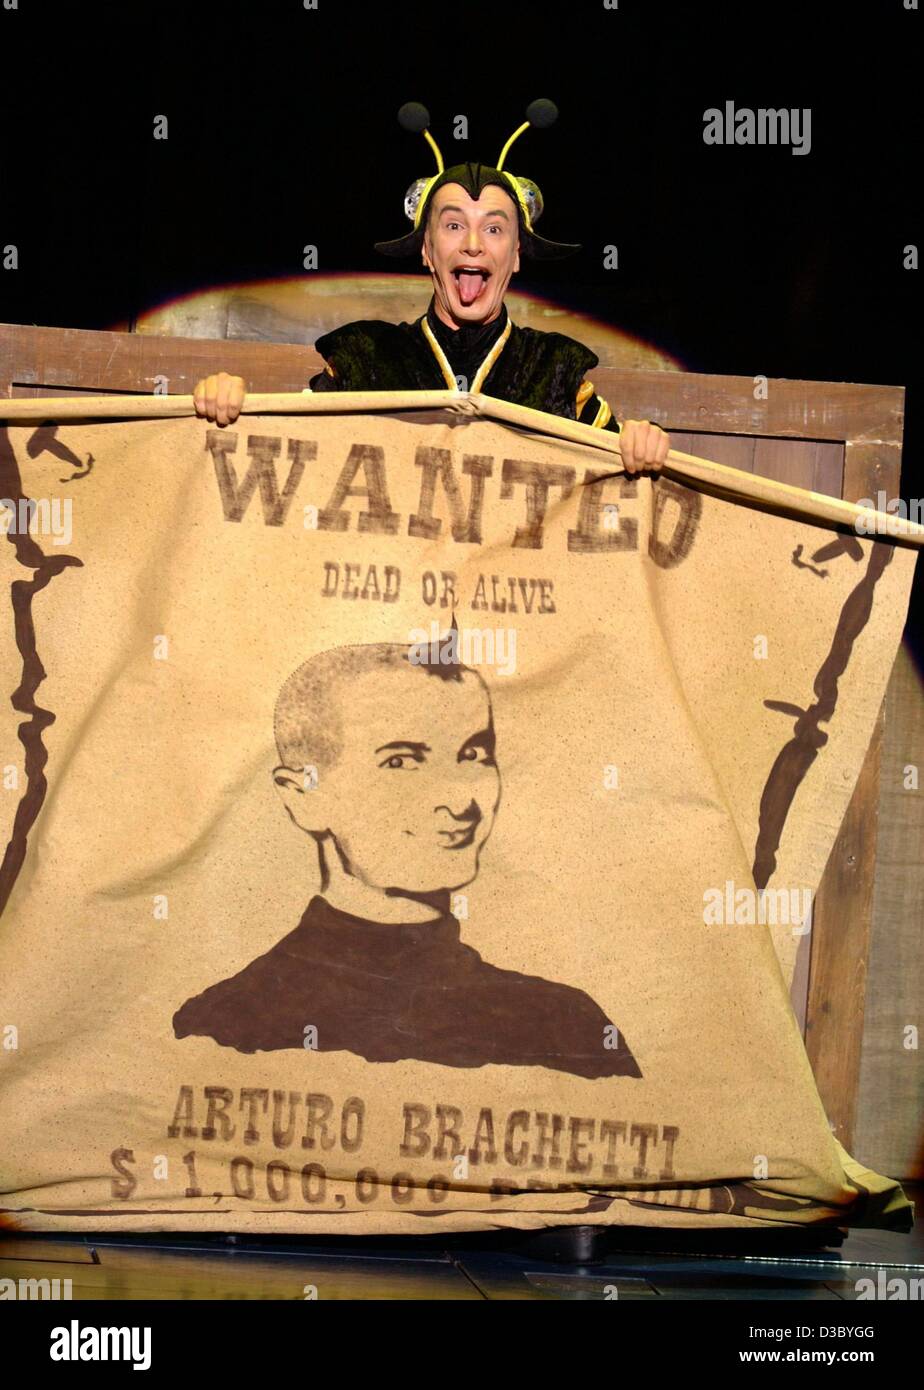 (dpa) - With a huge 'Wanted' poster the Italian quick-change artist Arturo Brachetti performs on stage during a press show in Cologne, Germany, 25 July 2003. From 24 July to 10 August the artist will perform his show 'Der Mann mit den tausend Gesichtern' (the man with the 1000 faces) in Cologne. Wit Stock Photo